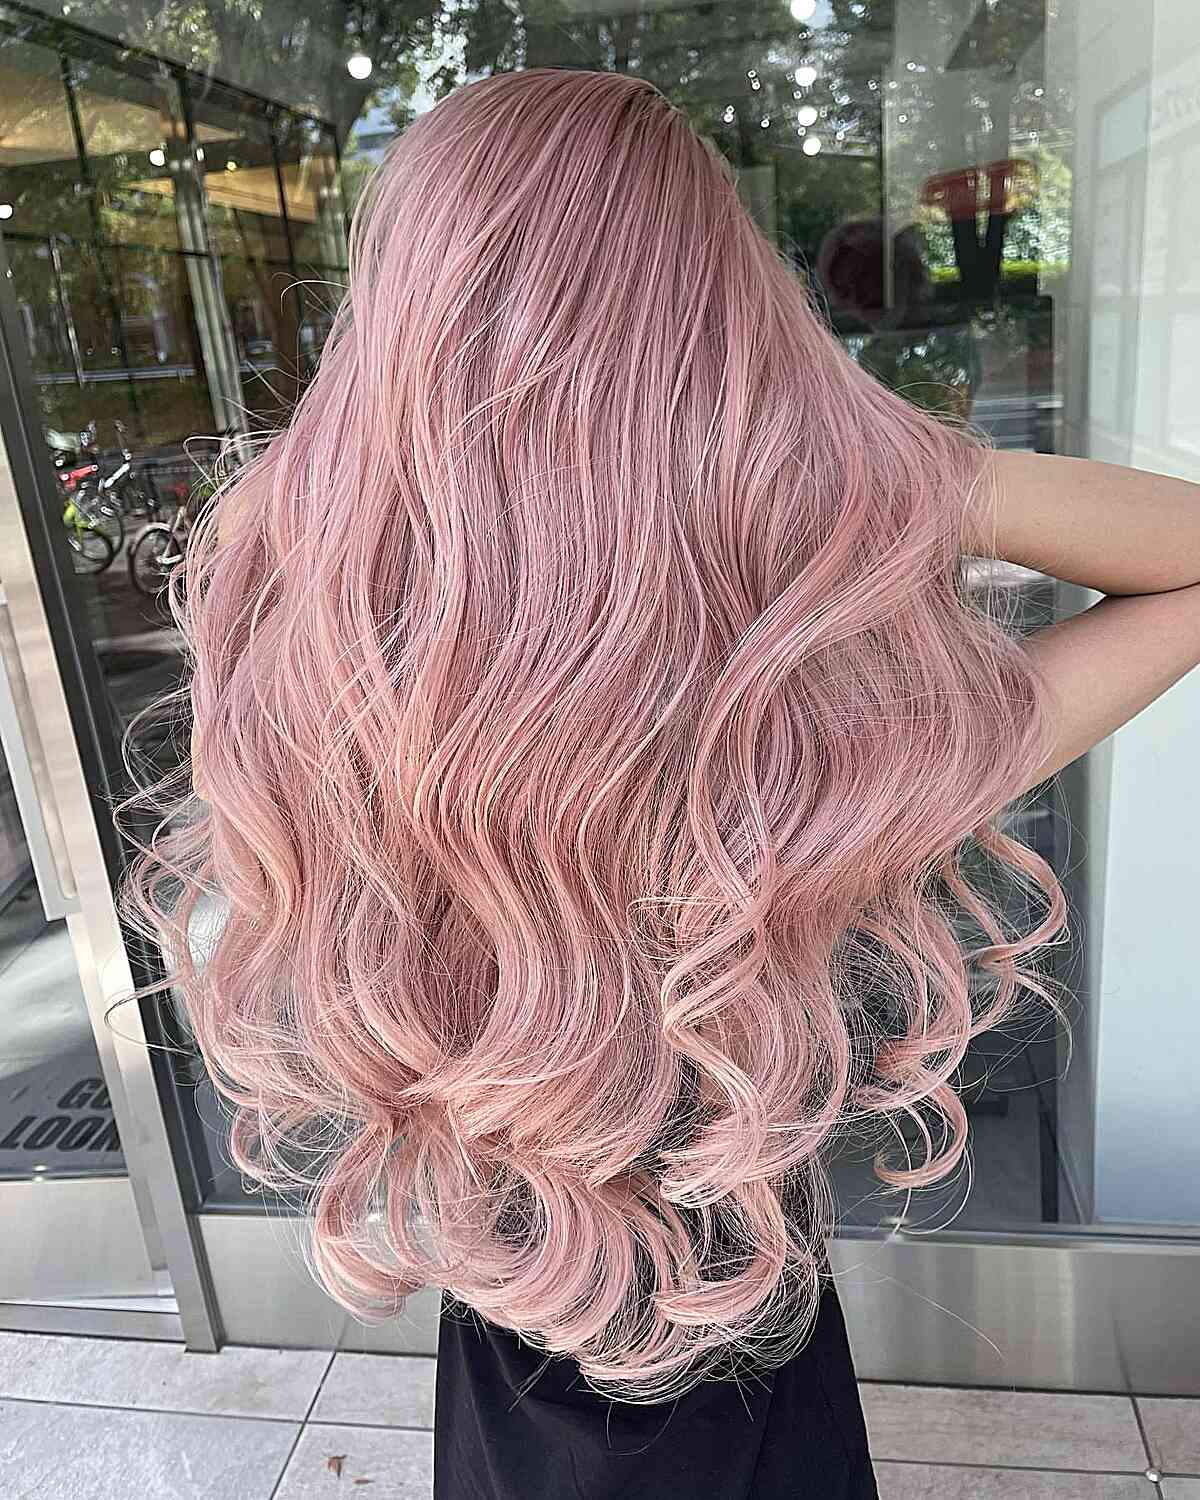 tips for pink hair? i wanted to dye my hair this color, but this would be  my first pastel color so i'm lost. any recommended dye? my natural hair is  dark brown,